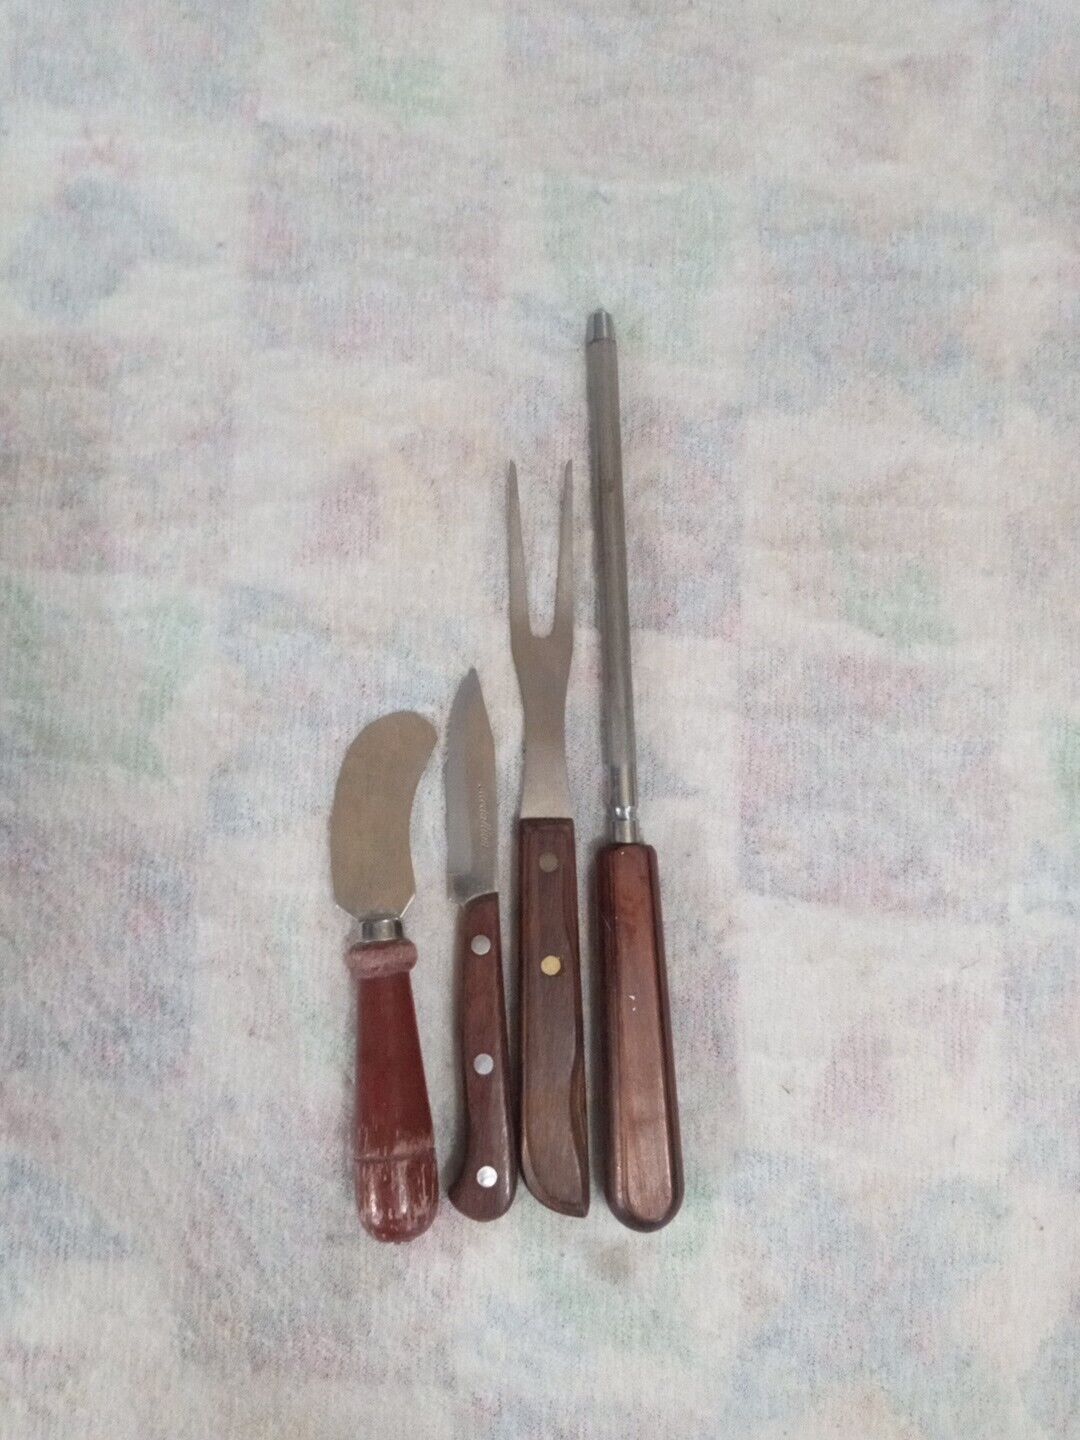 Vintage Japan Made Cutlery Lot Of 4 Decent Condition Nice Pieces Wood Handles